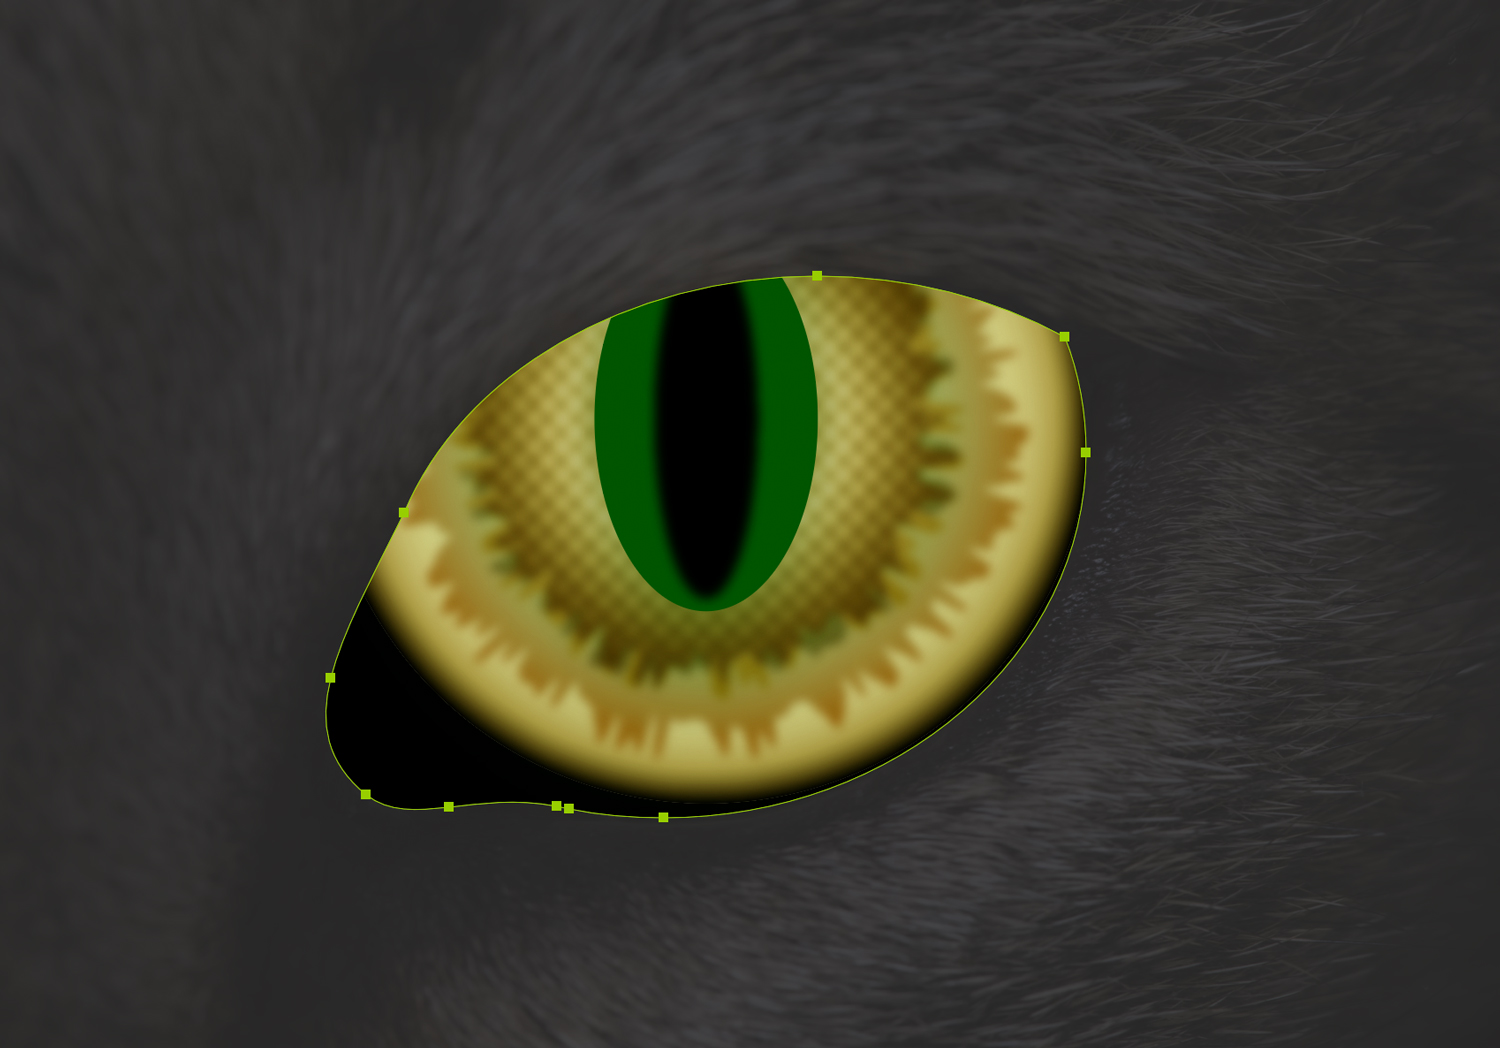 A cat eye with a green oval behind the pupil